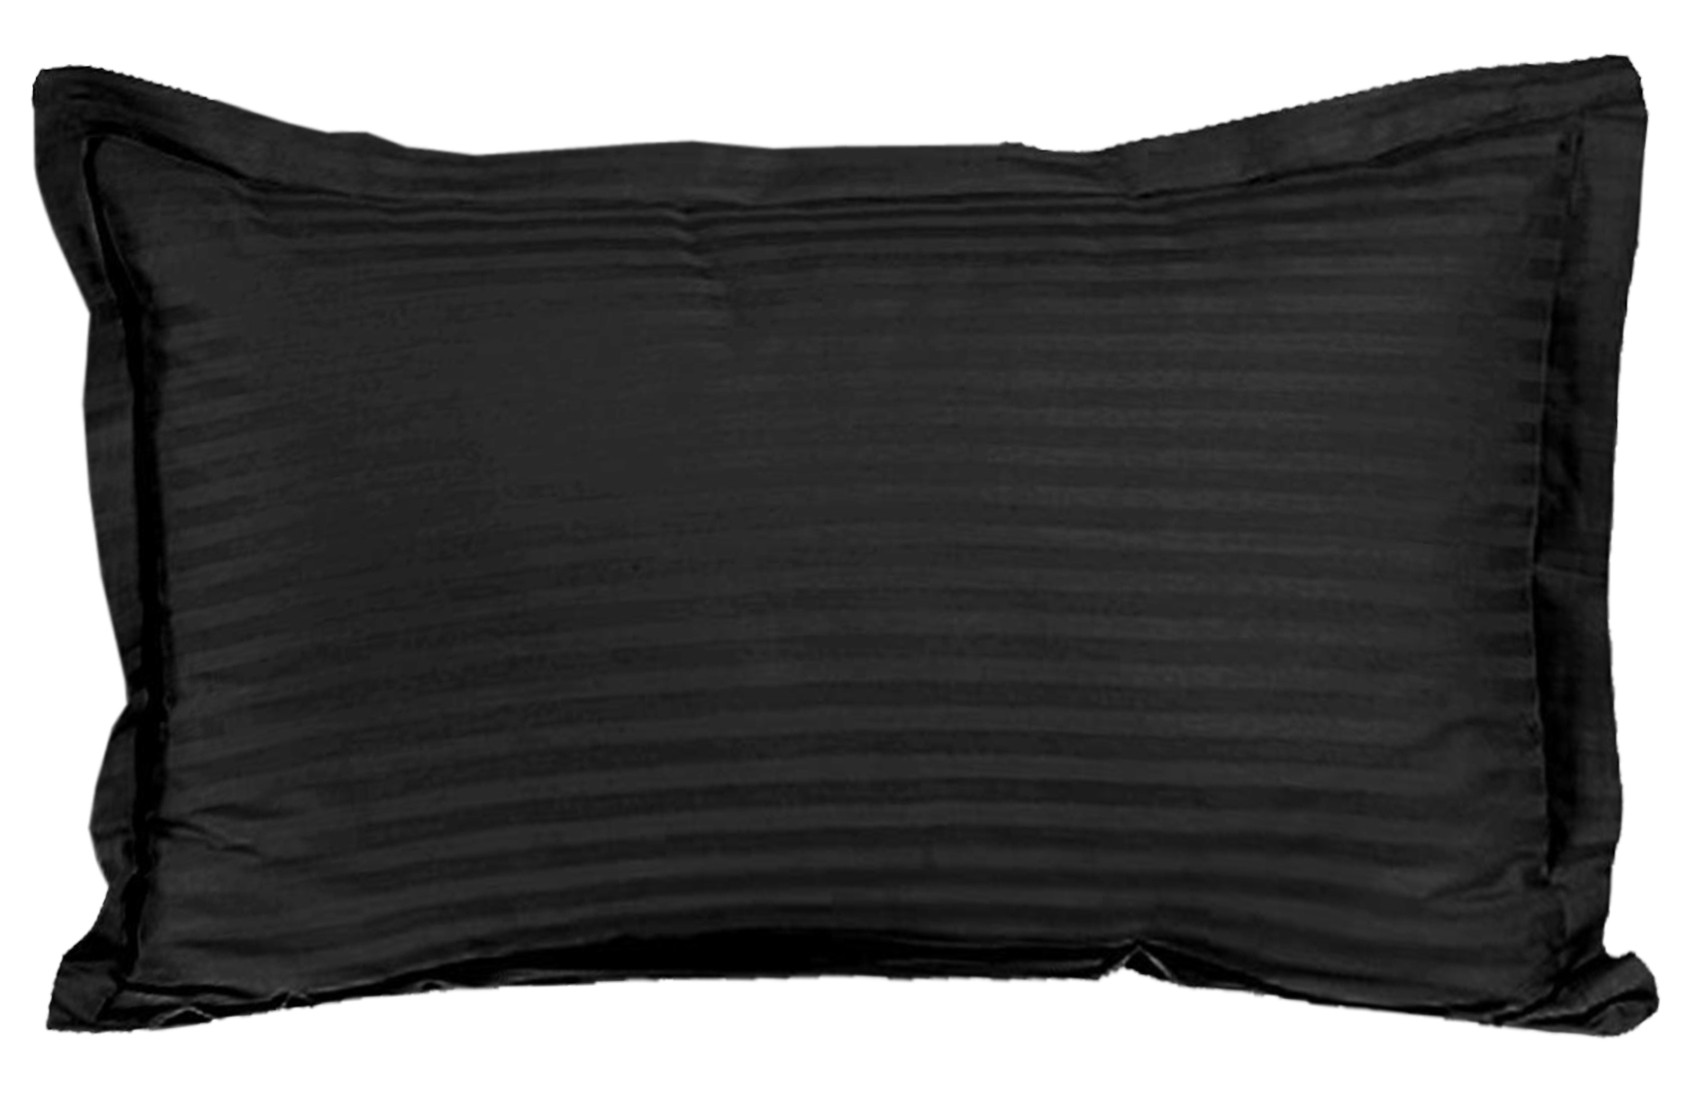 Kuber Industries Lining Design Breathable & Soft Cotton Pillow Cover/Protector/Case- 18x28 Inch,(Black)-HS43KUBMART26773